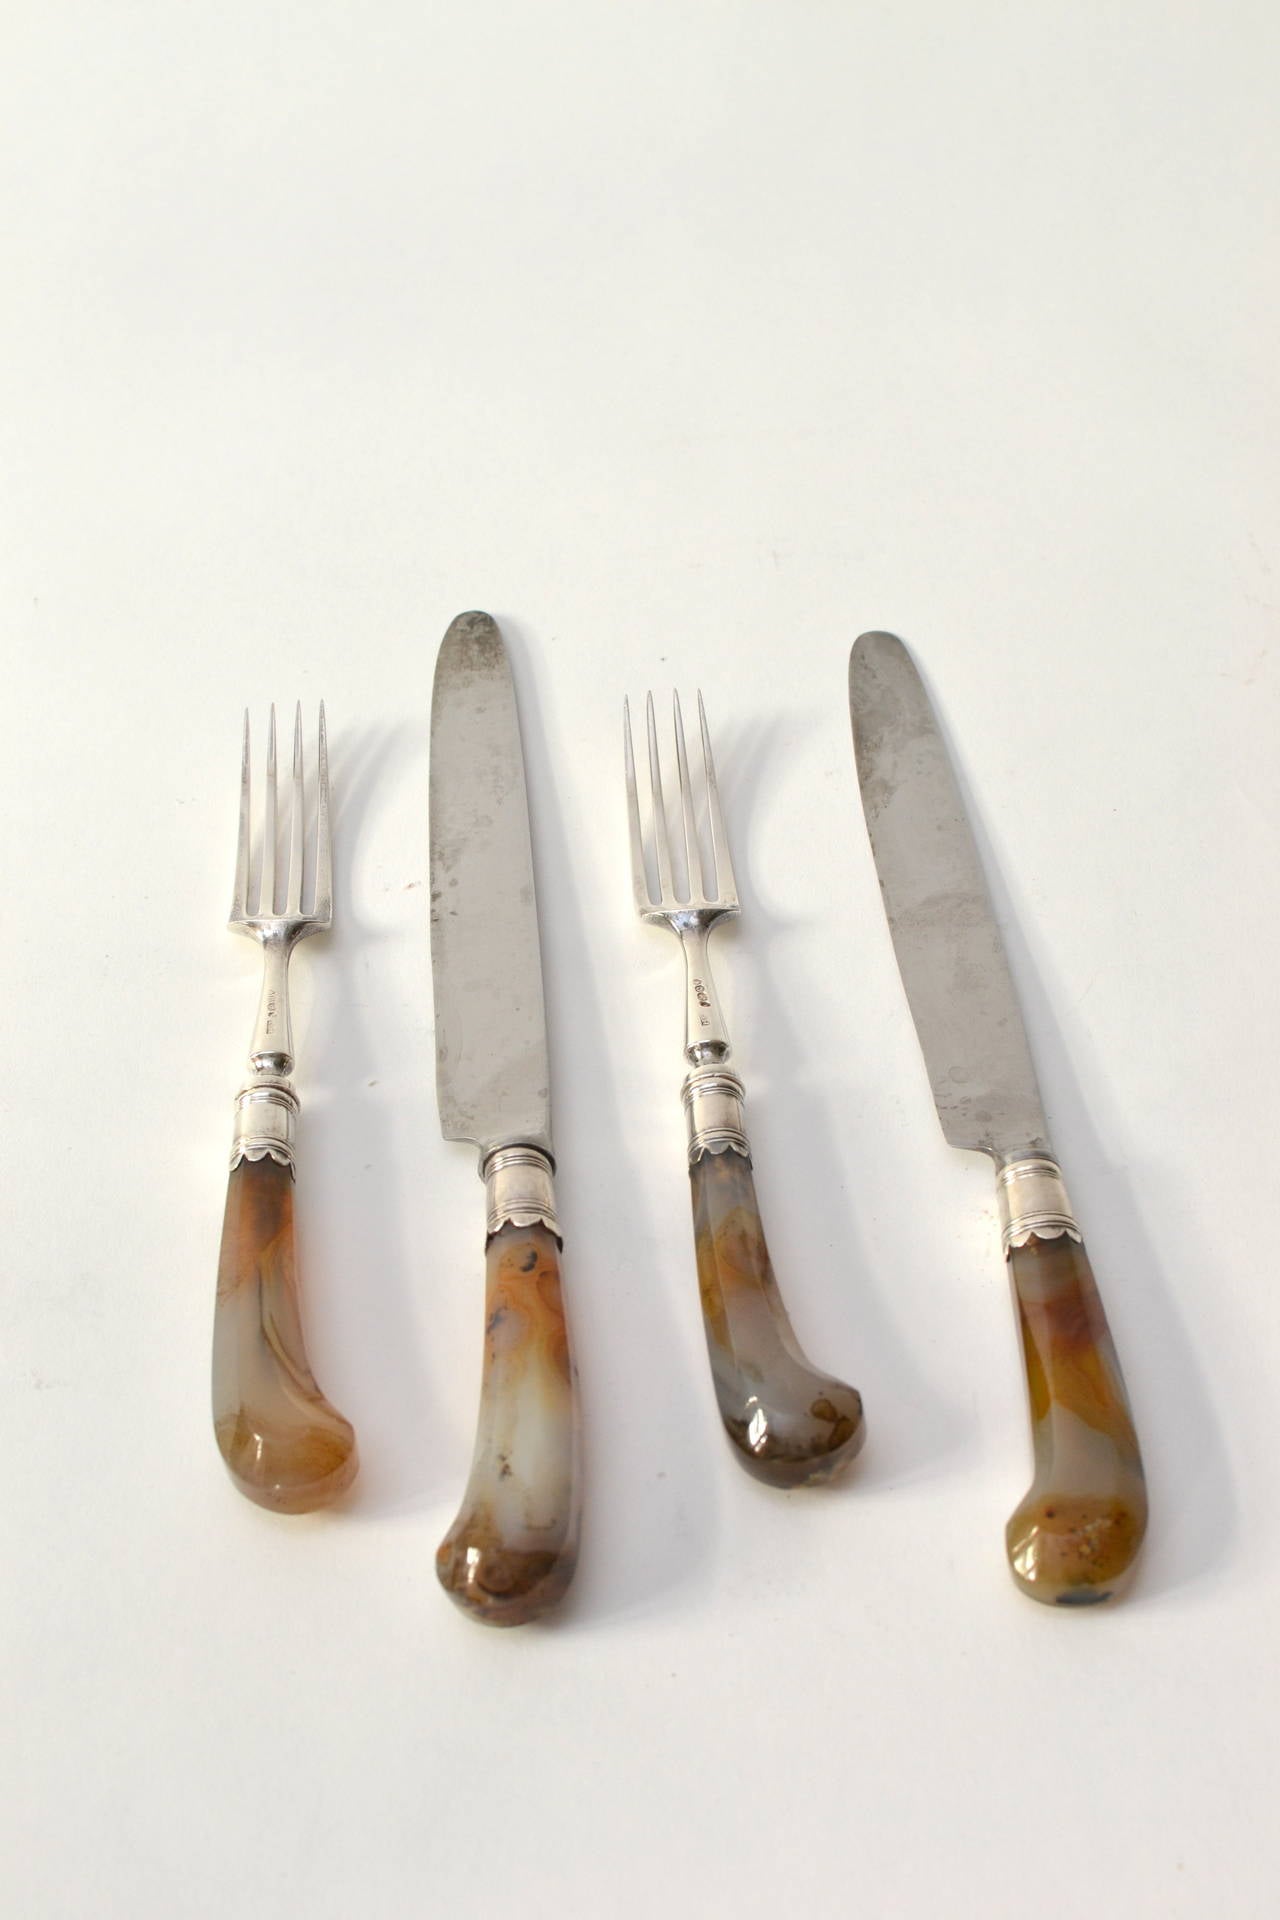 English Set of 18 Agate Handled Knives and Forks Together with Six Fruit Knives 1